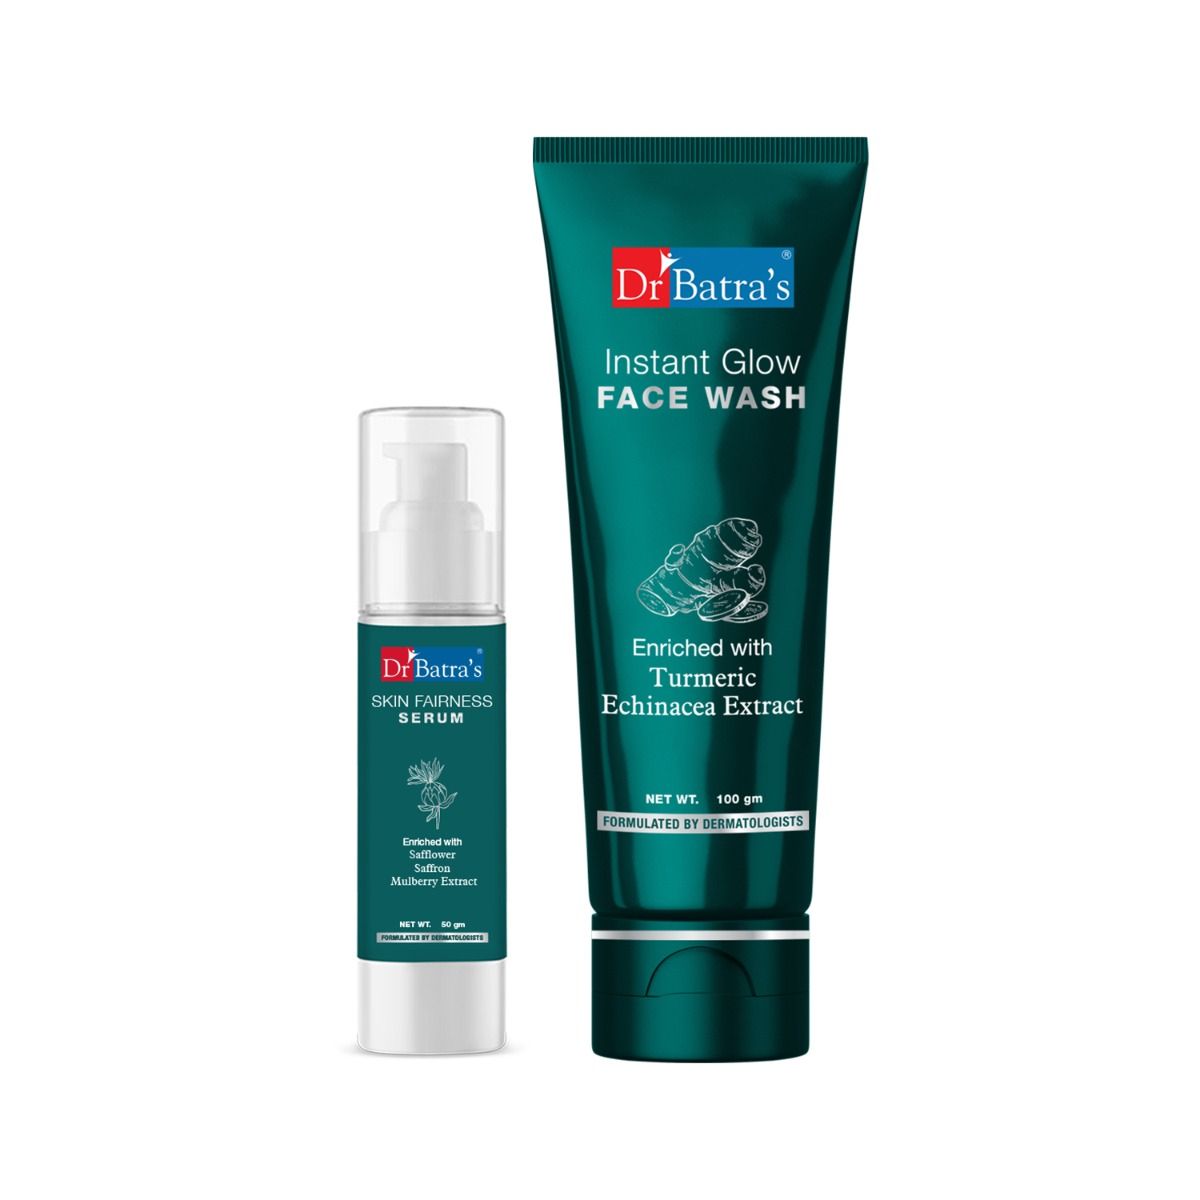     			Dr Batra's Skin Fairness Serum - 50 G and Face Wash Instant Glow - 100 gm (Pack of 2)